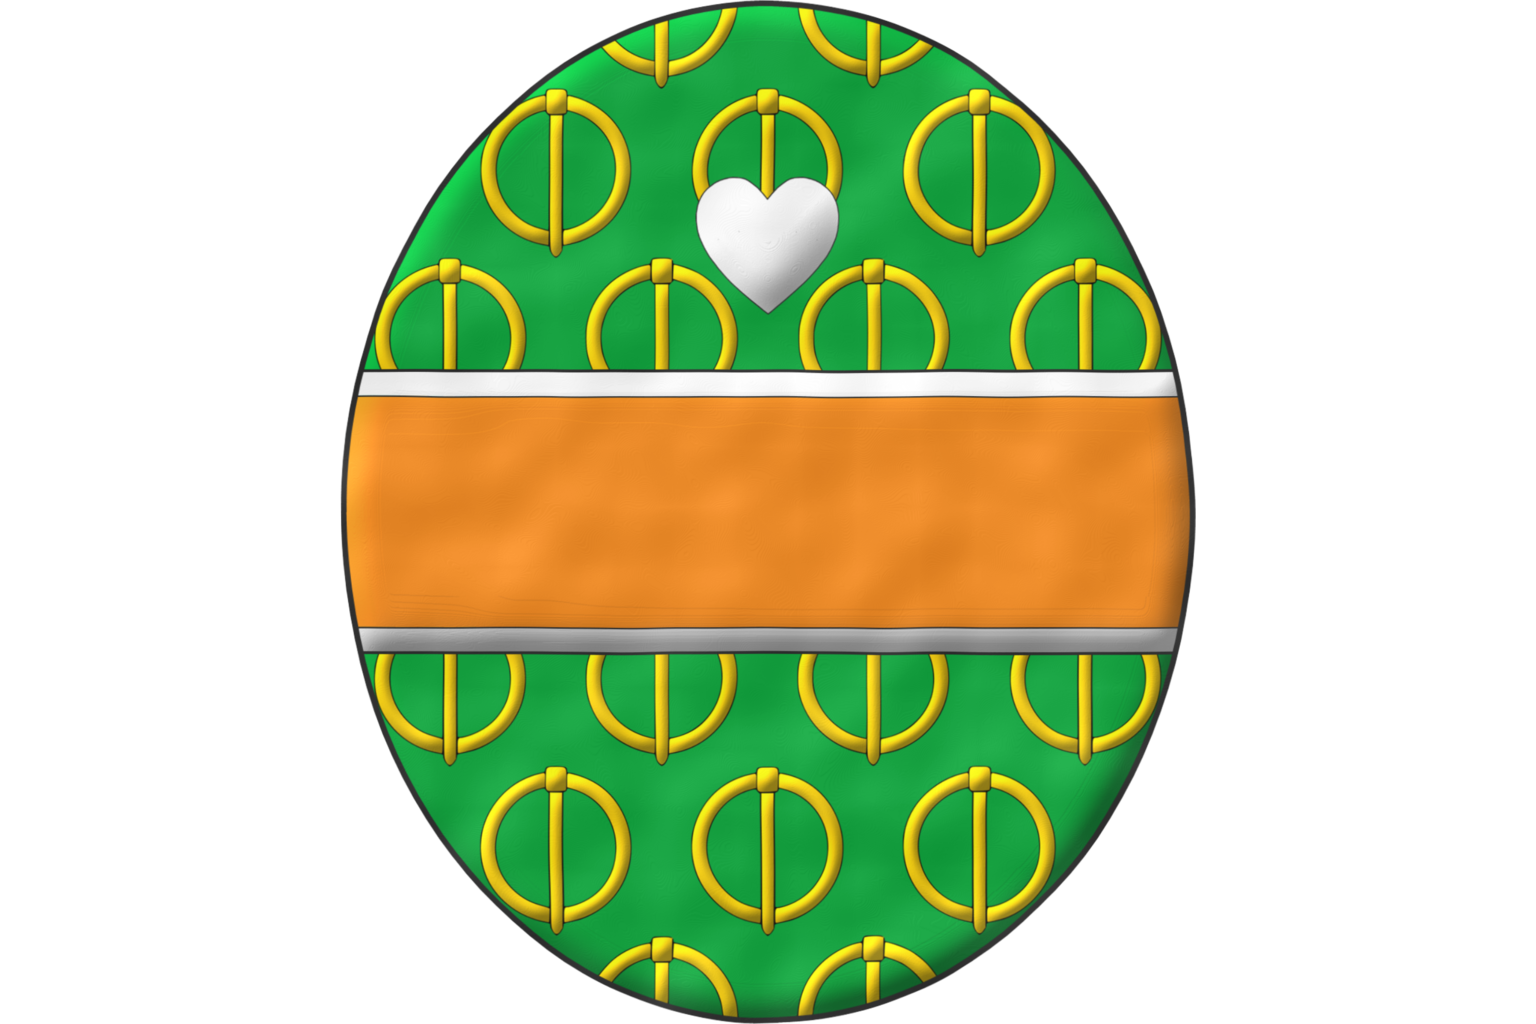 Vert semé of buckles points downward Or, a fess Tenné, fimbriated Argent; a heart Argent for difference.